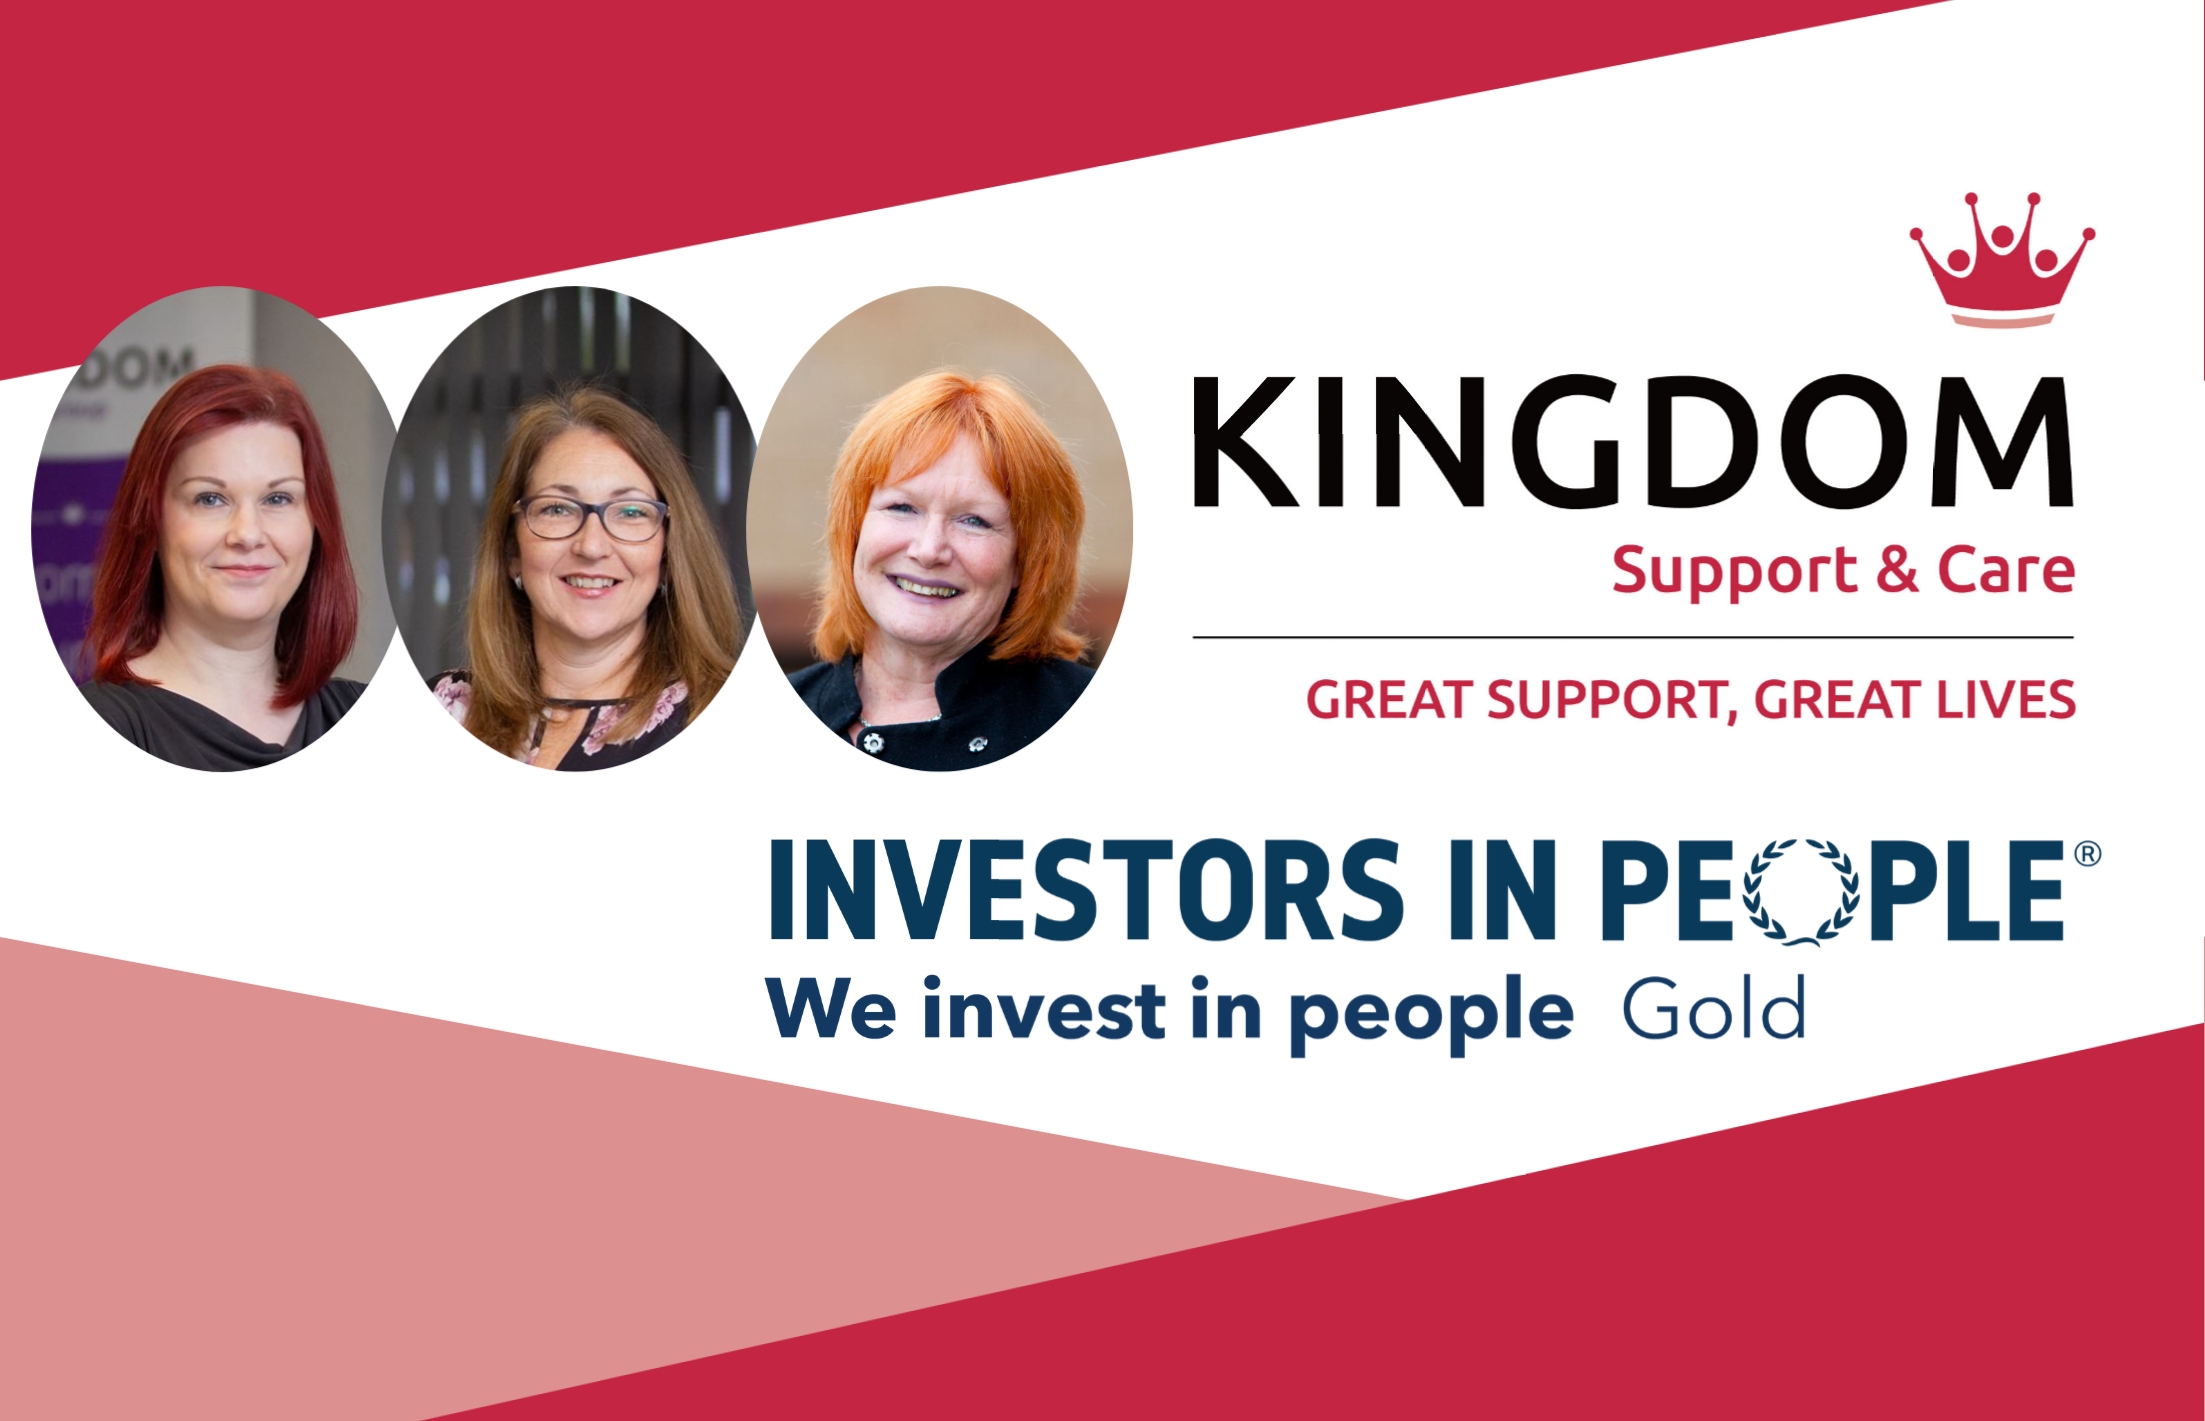 Kingdom Support & Care awarded Investors In People Gold